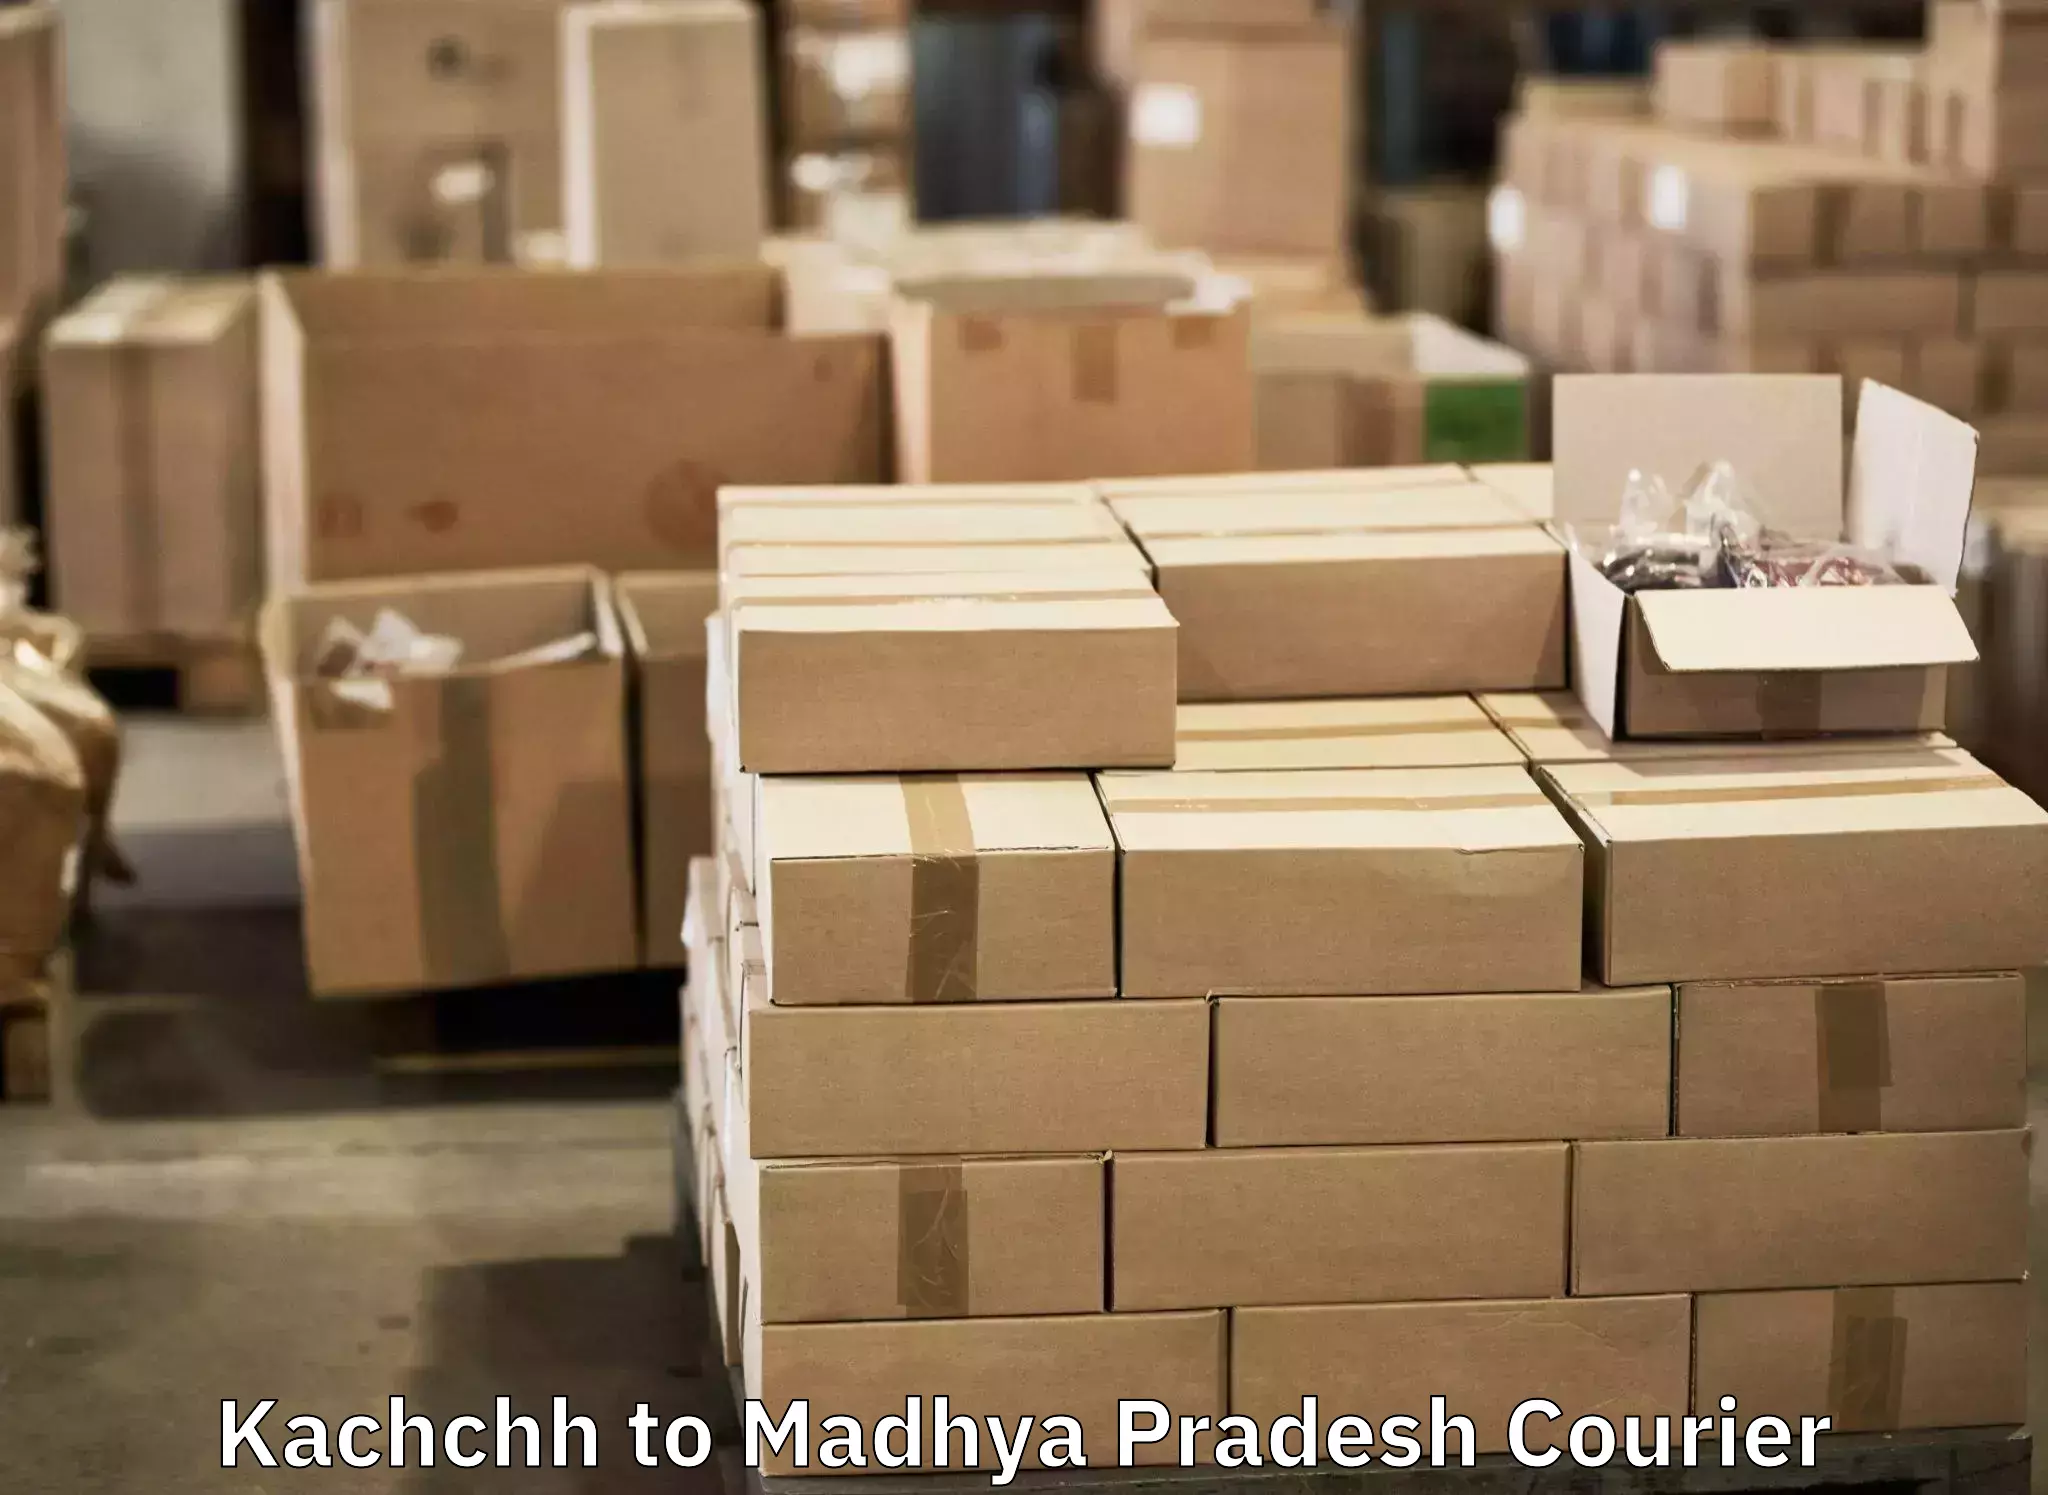 Baggage relocation service Kachchh to Ratlam